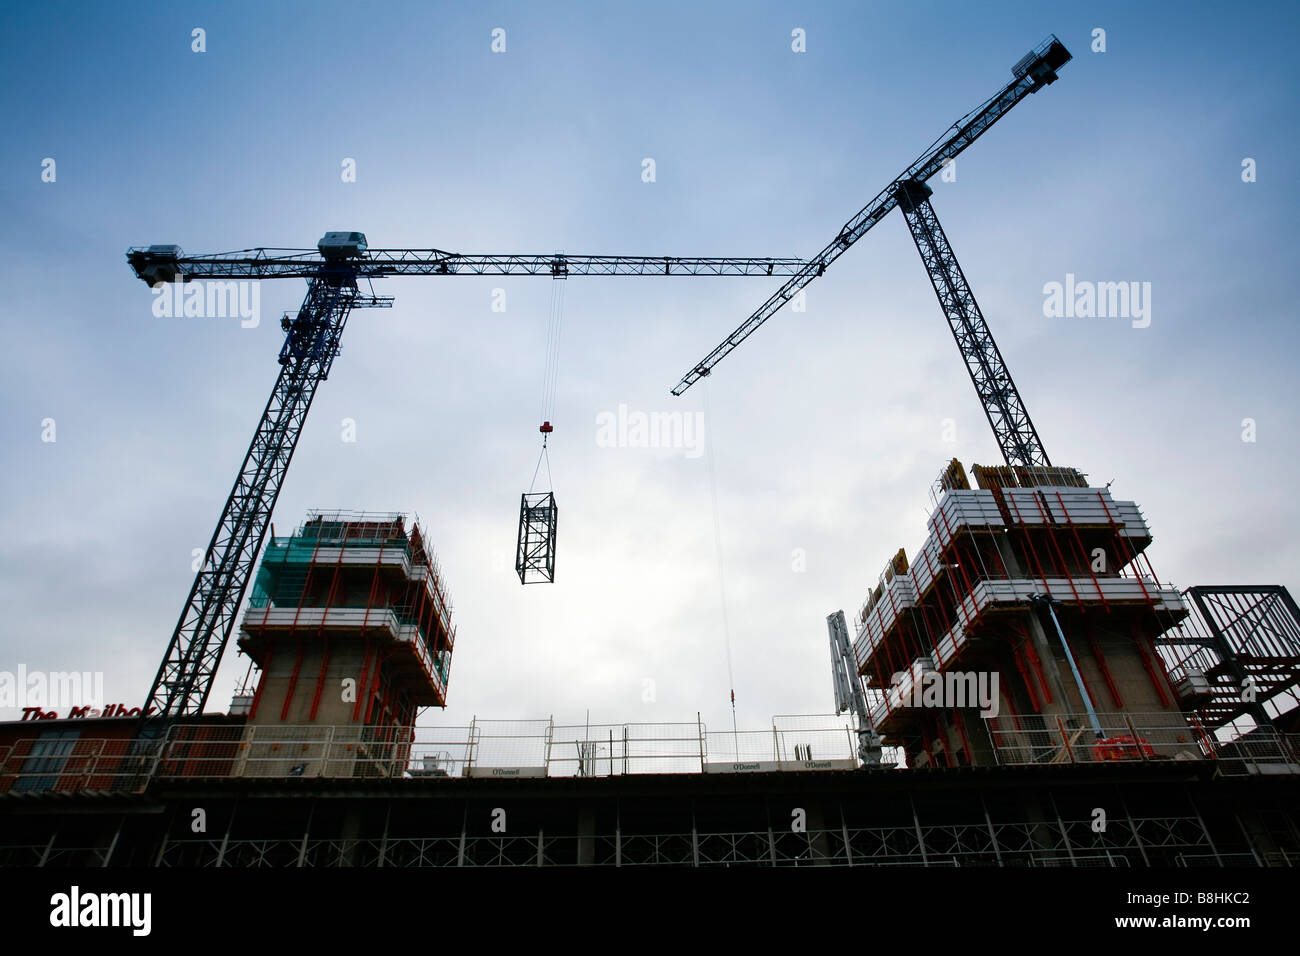 Hydraulic crane being constructed Stock Photo - Alamy